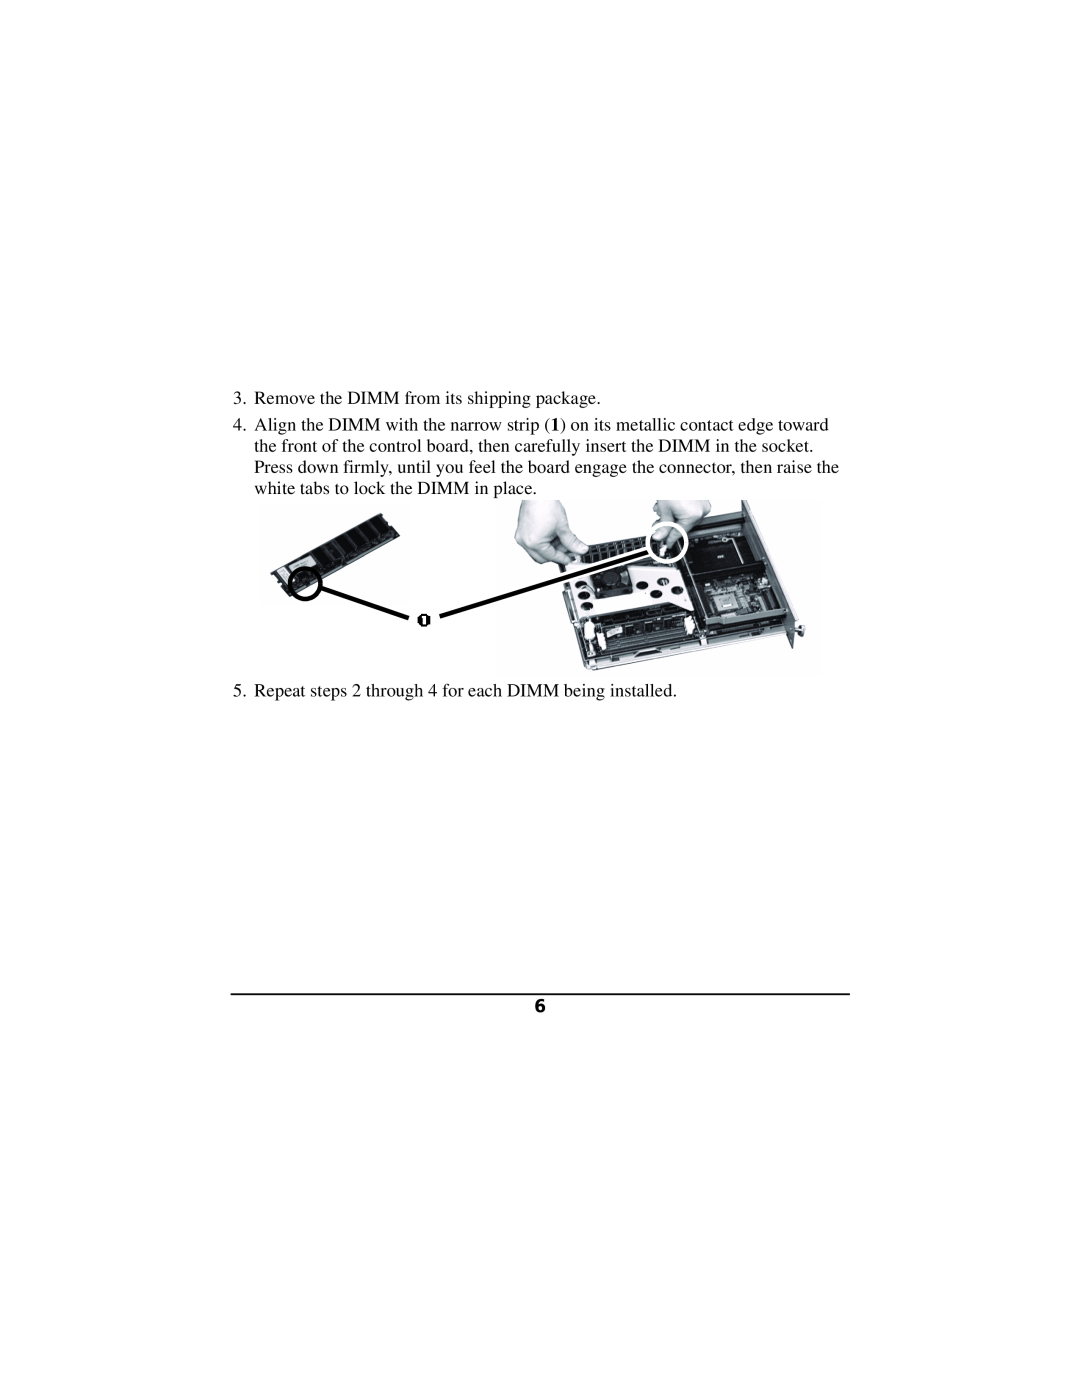 Oki 70040901 installation instructions Remove the DIMM from its shipping package 